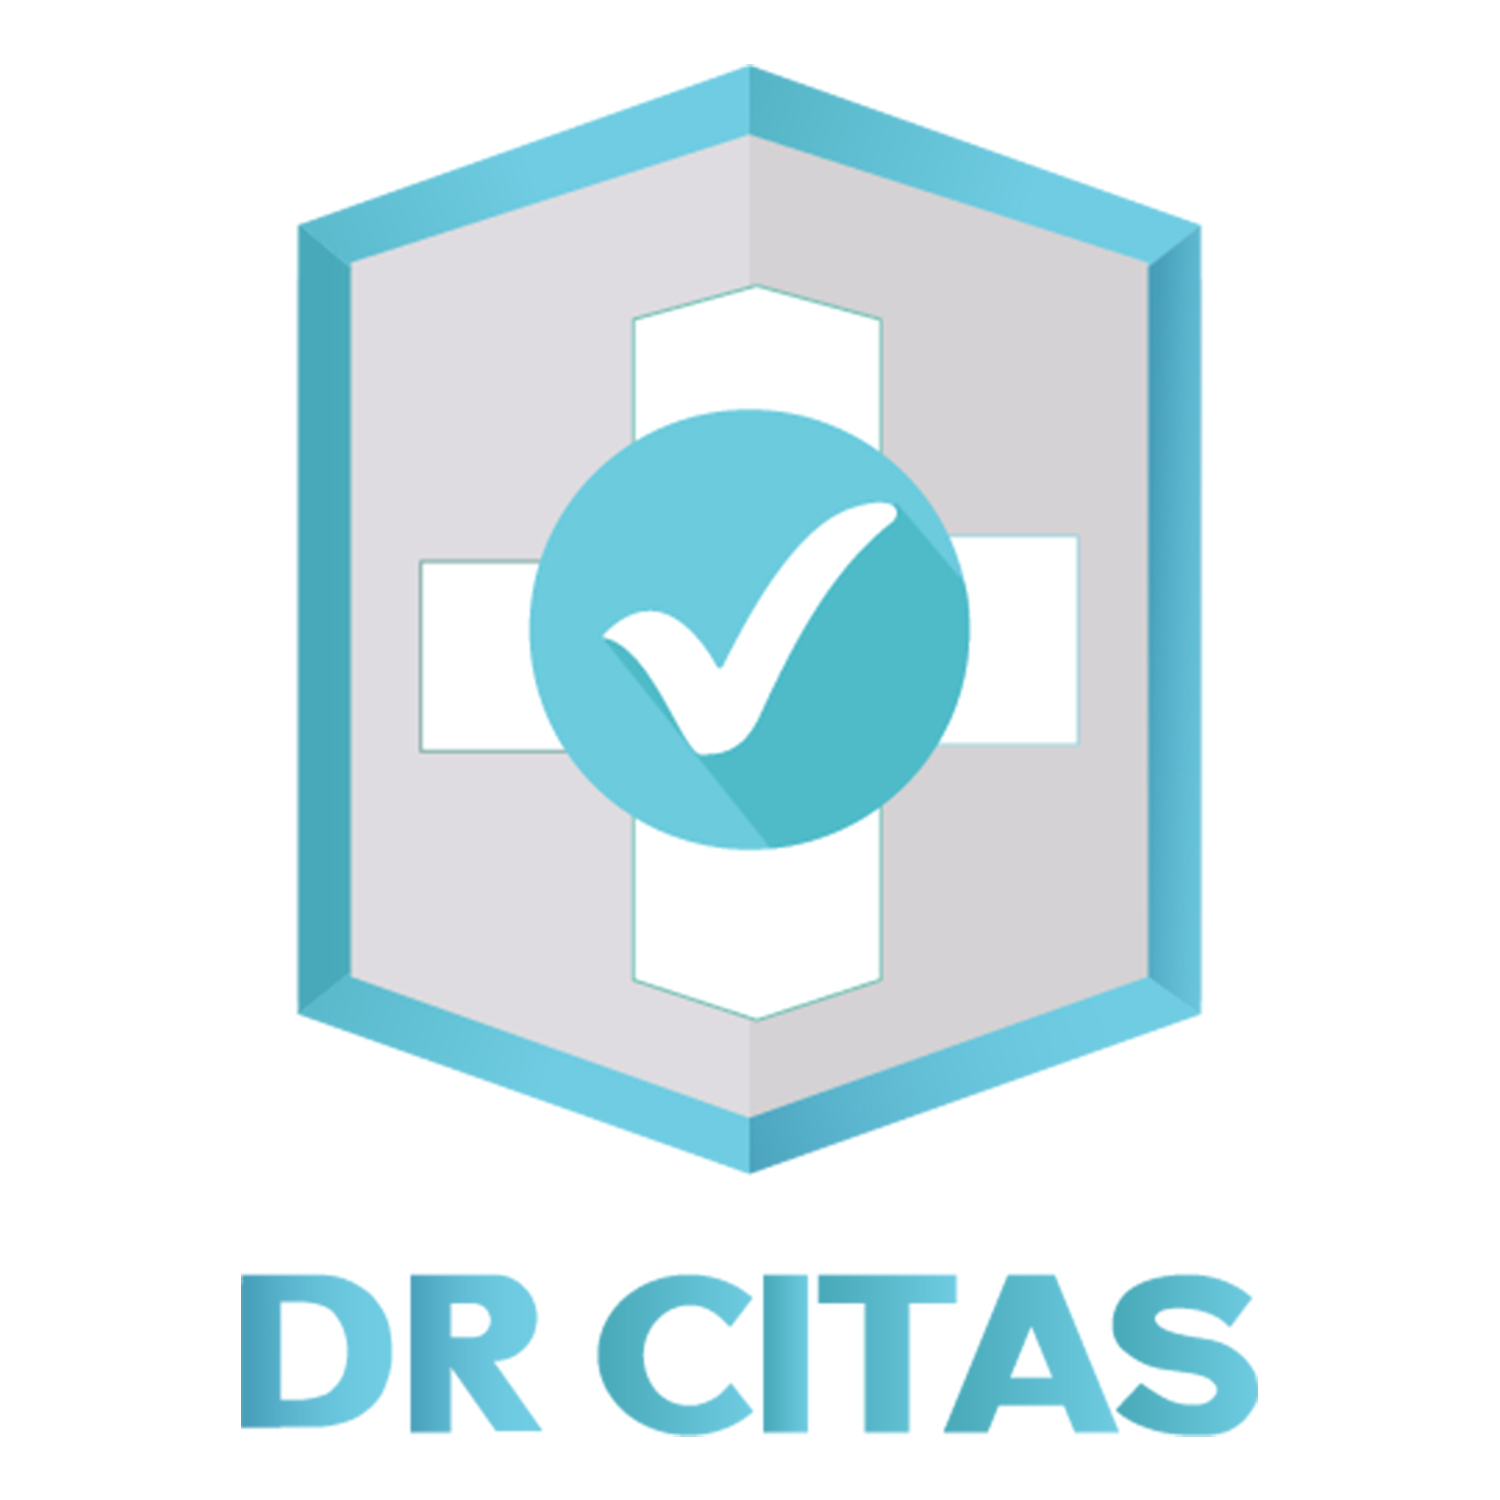 Dr. Citas - Medical Appointment Booking System